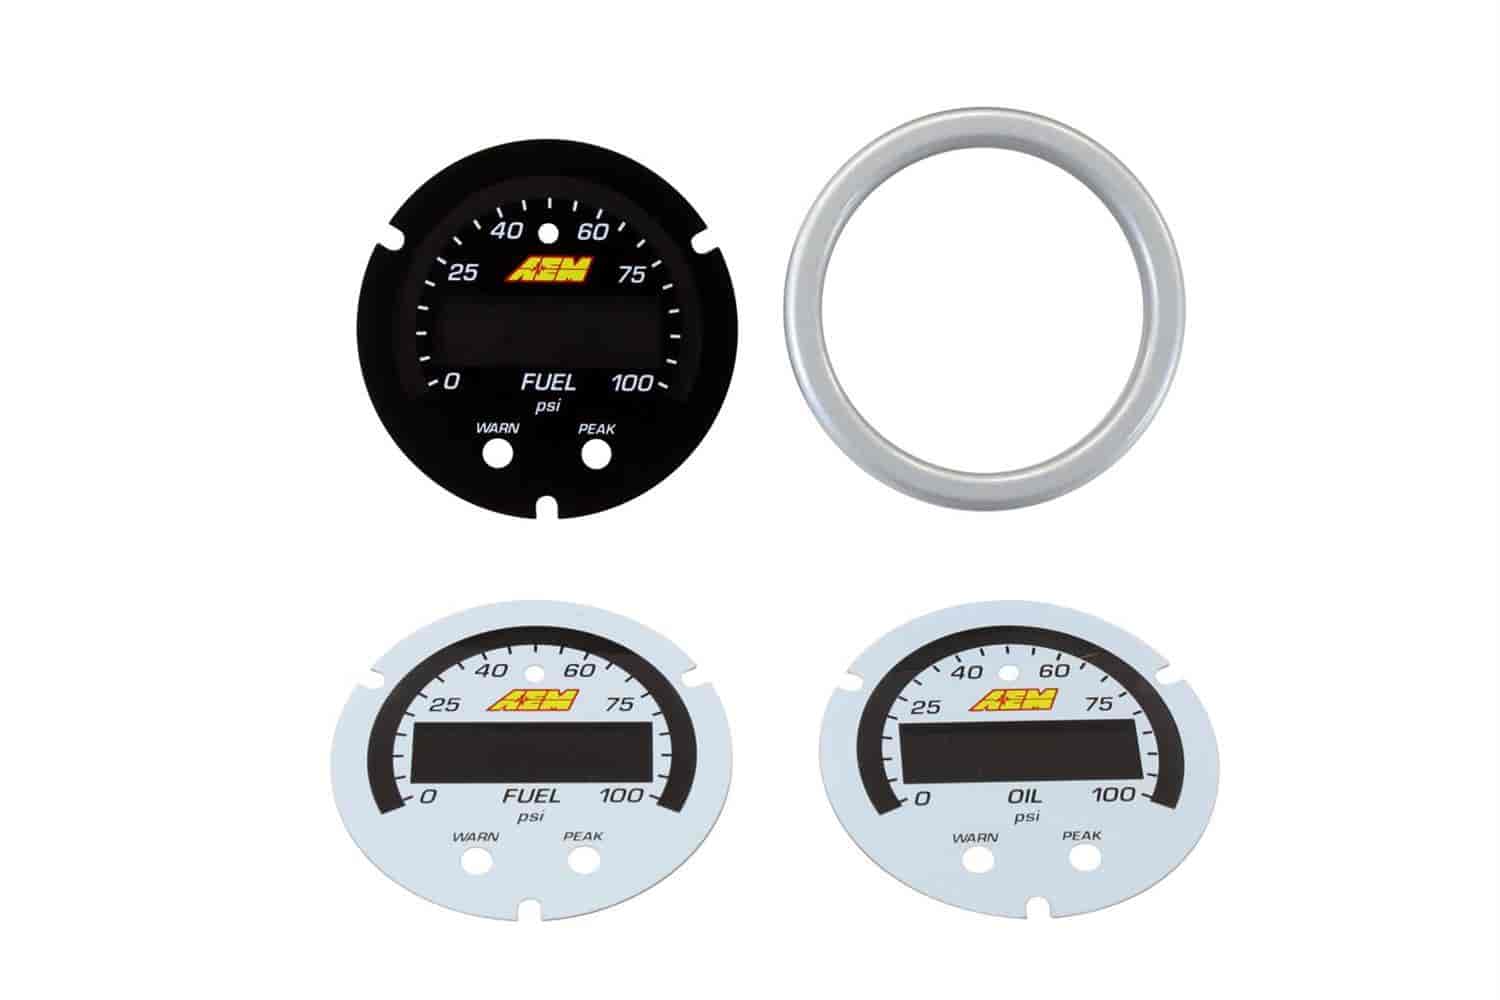 X-Series Oil/Fuel Pressure Gauge Accessory Kit Includes Silver Bezel And Black Fuel Faceplate, White Oil And Fuel Faceplates.